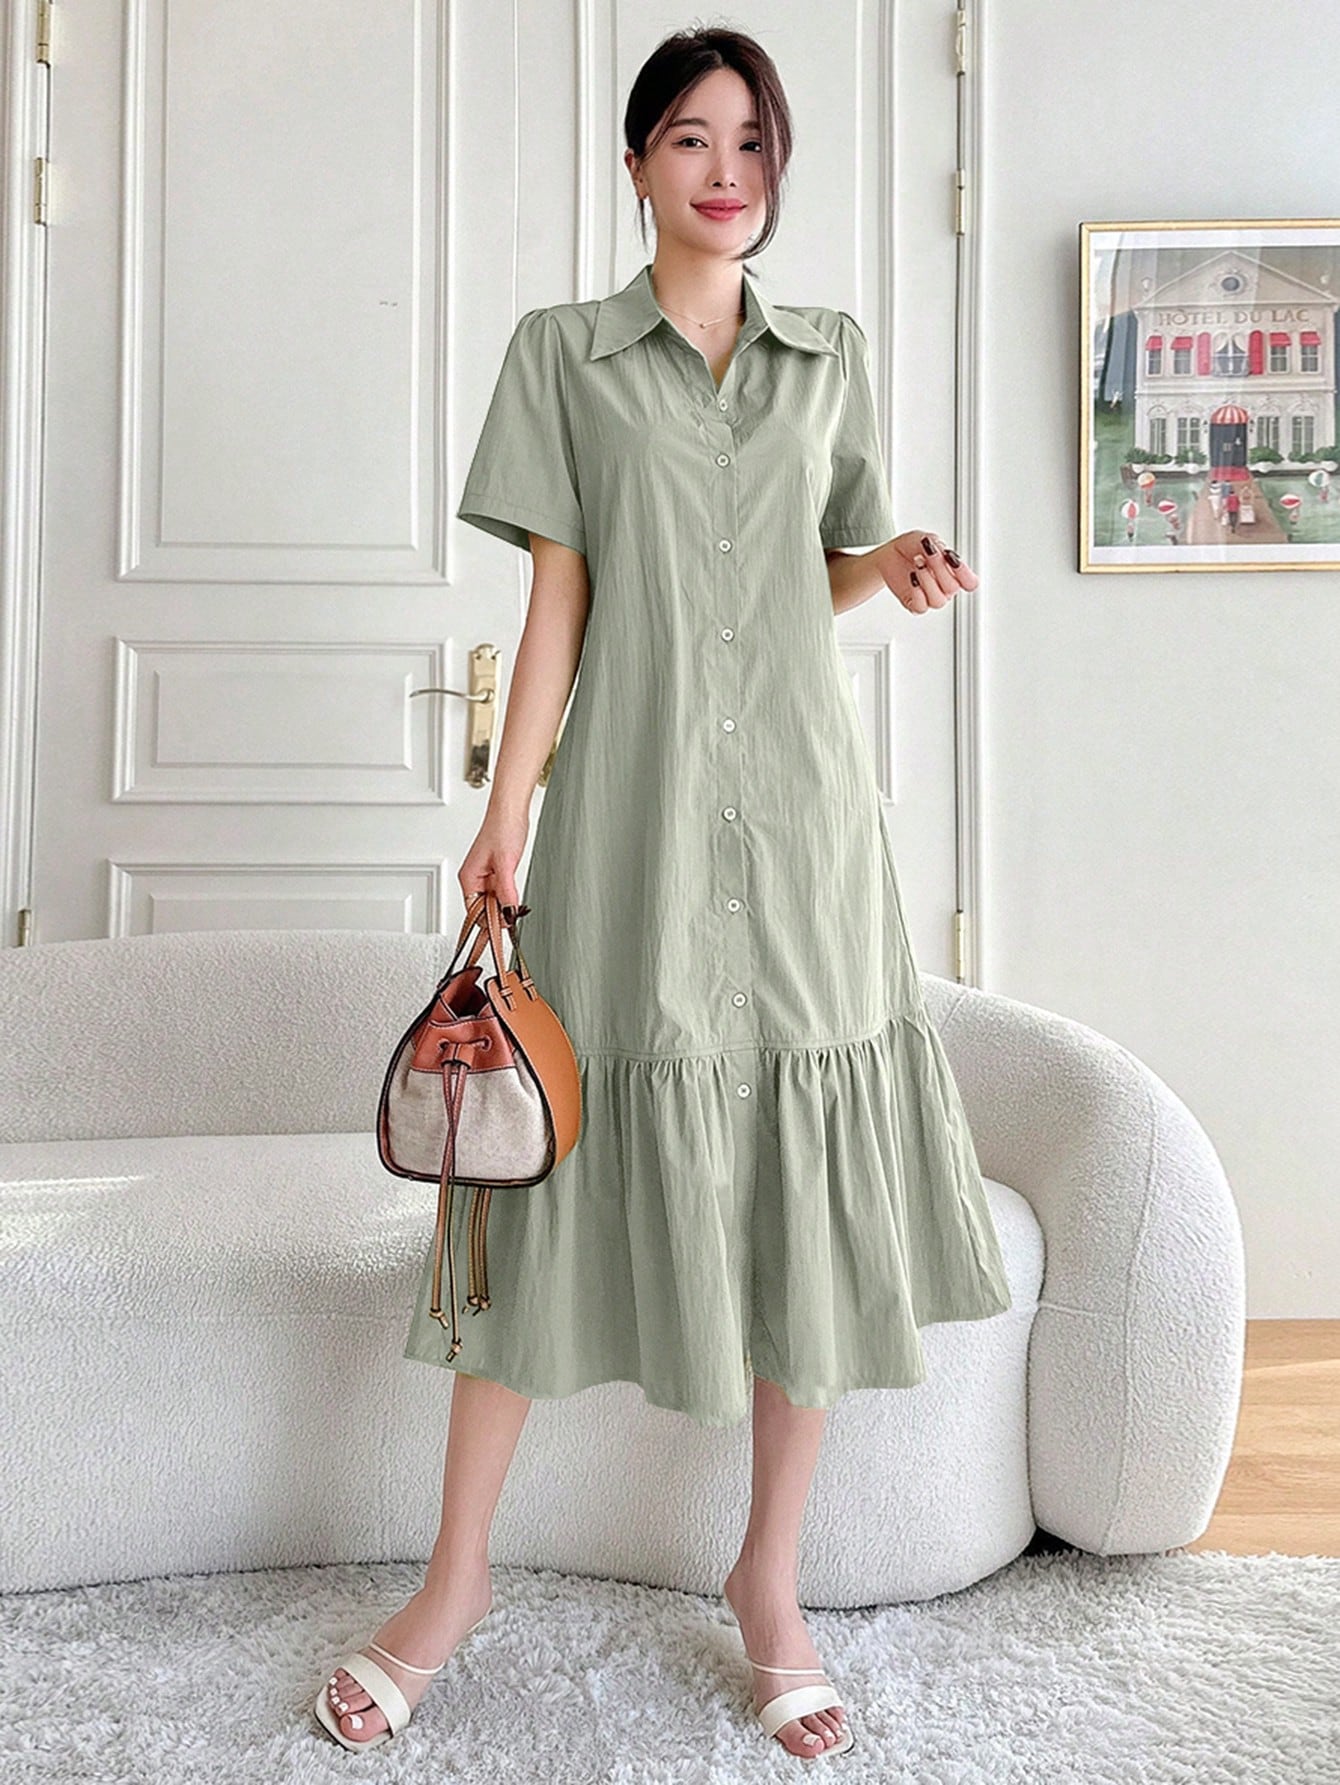 Loose Fit Bubble Sleeve Knee-Length Dress With Stand Collar, Button Front And Fish Tail Hem